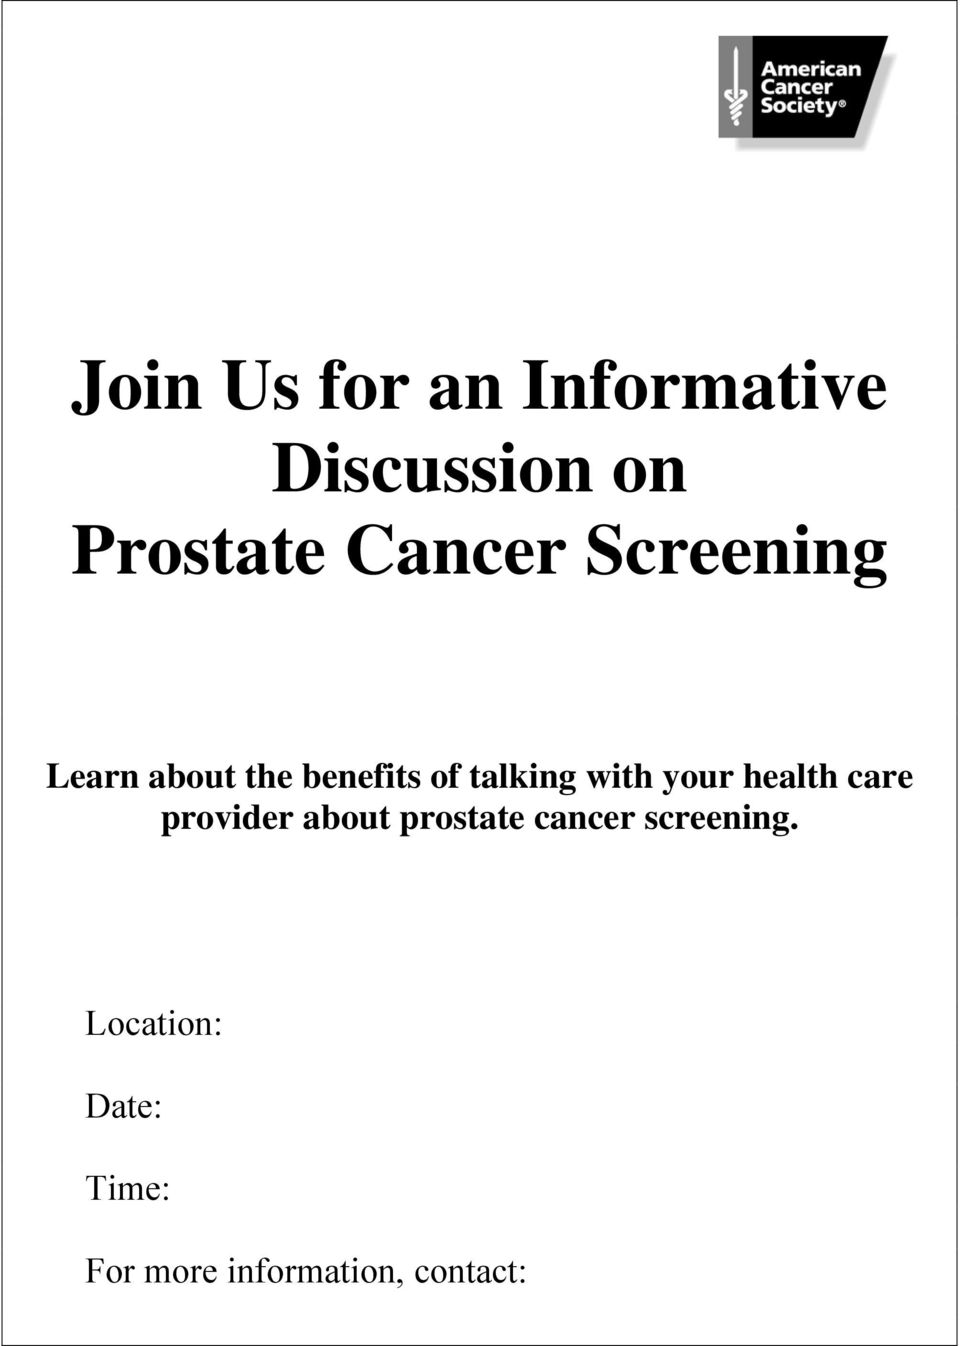 with your health care provider about prostate cancer